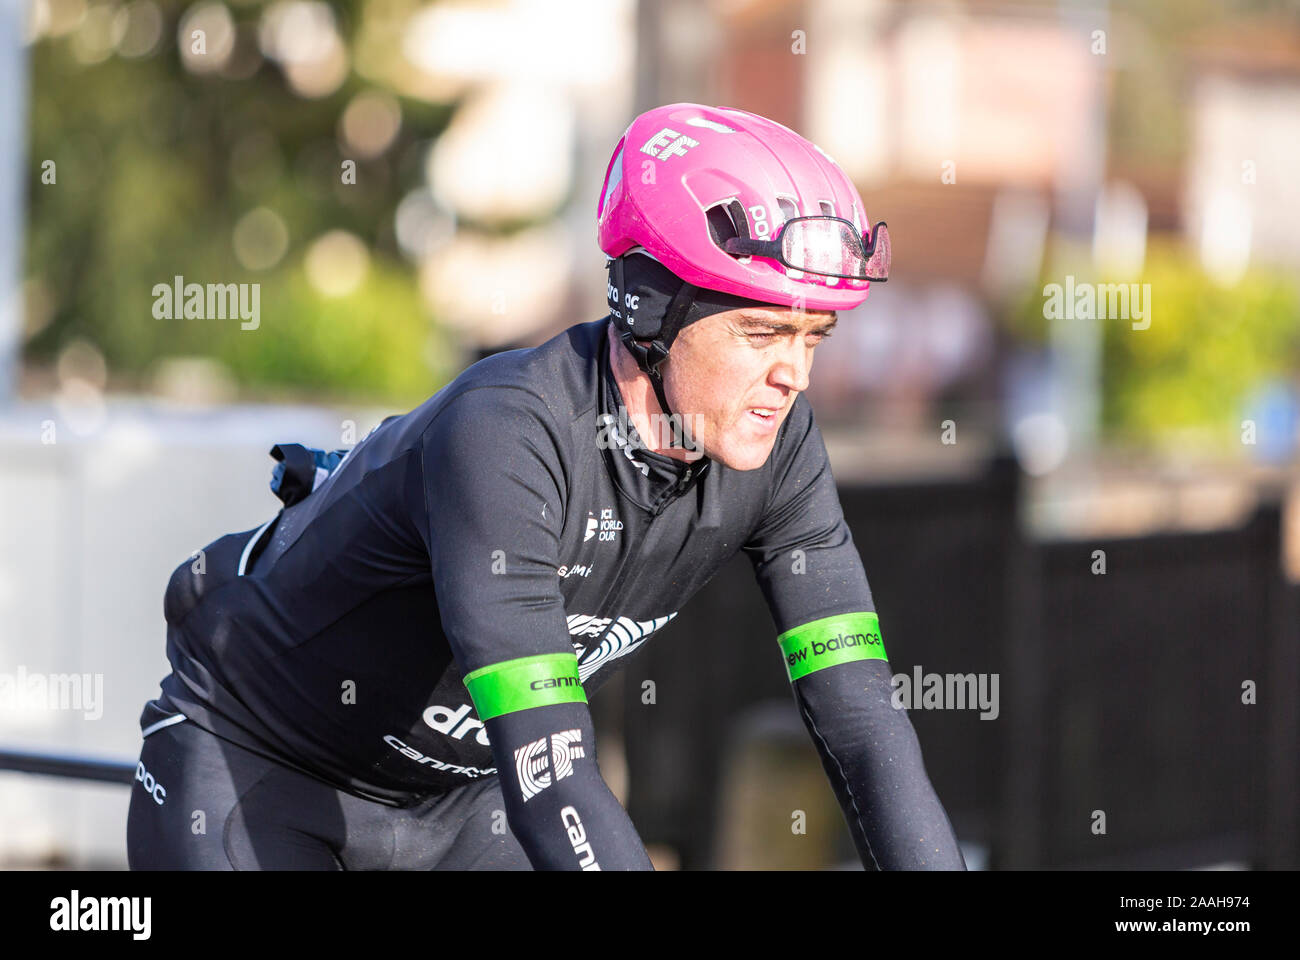 Meudon, France - March 4, 2018: The New Zealand cyclist Tom Scully of Team  EF Education First-Drapac Cannondale riding during Paris-Nice 2018 Stock  Photo - Alamy